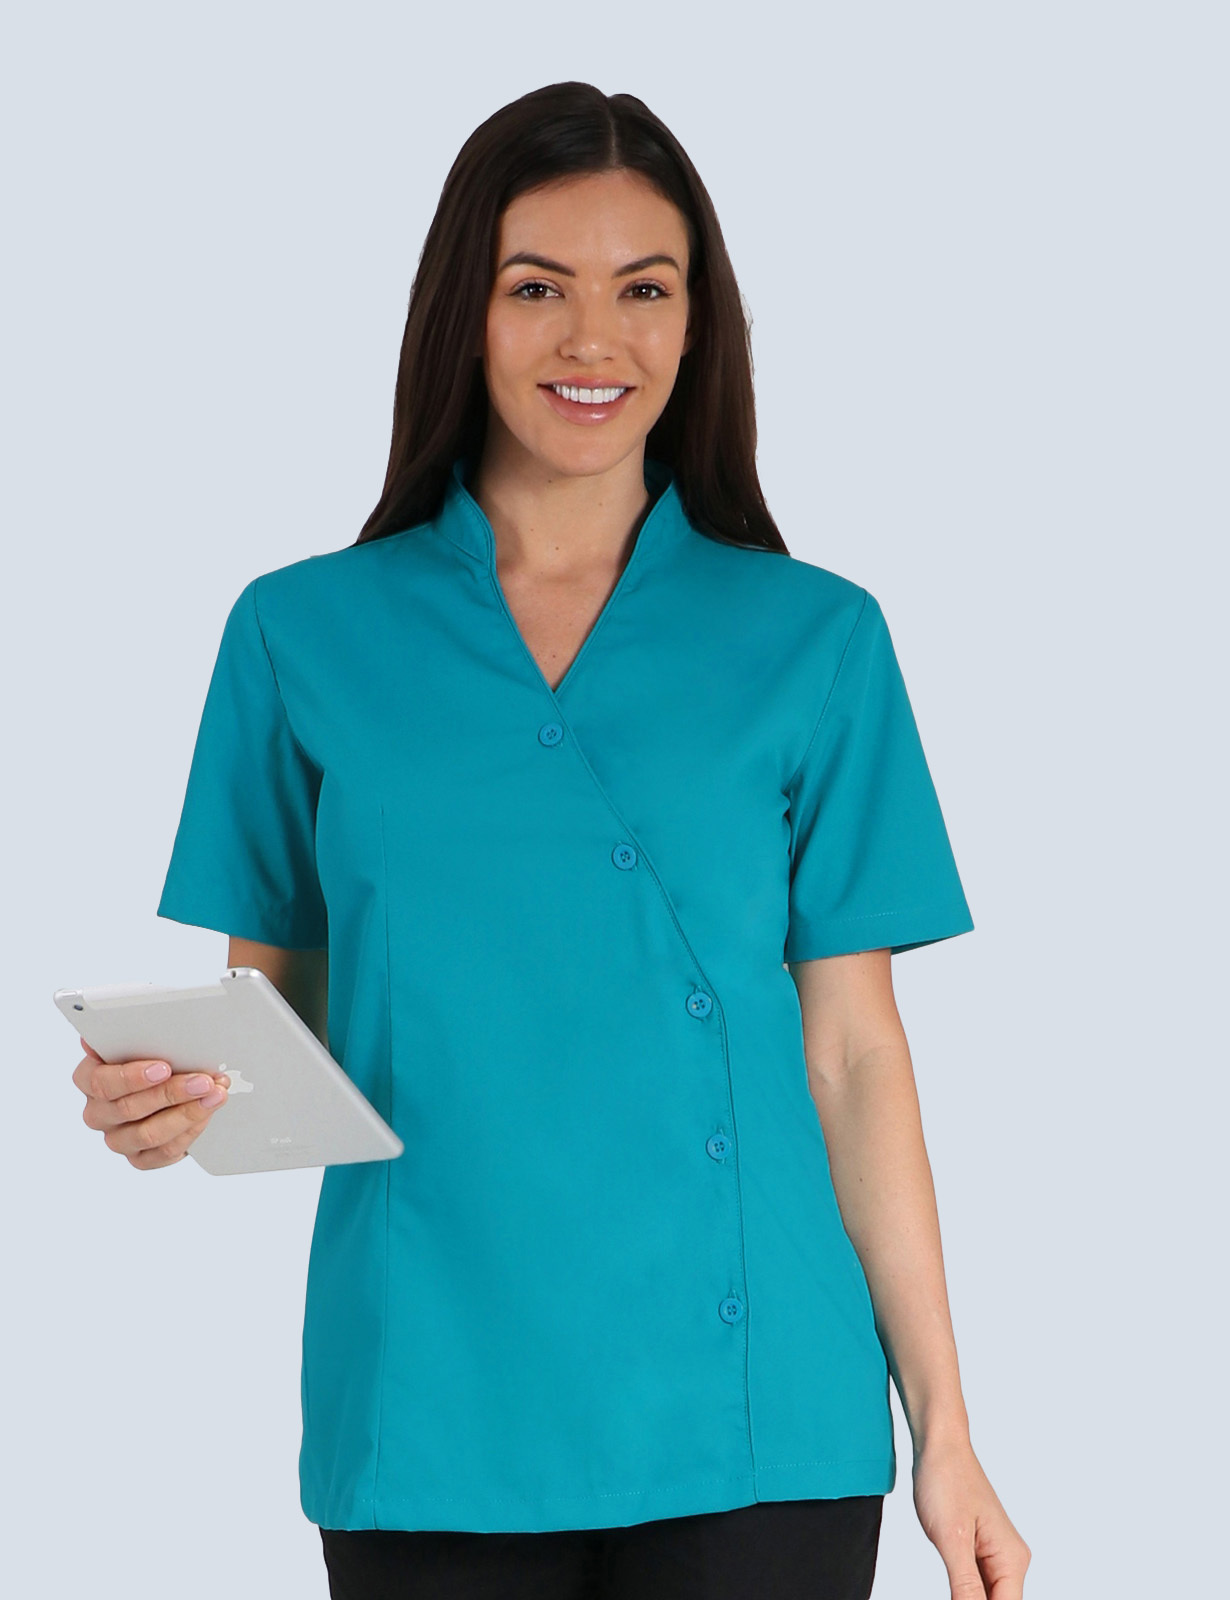 Jessie Style Tunic Top - Teal - 3X Large